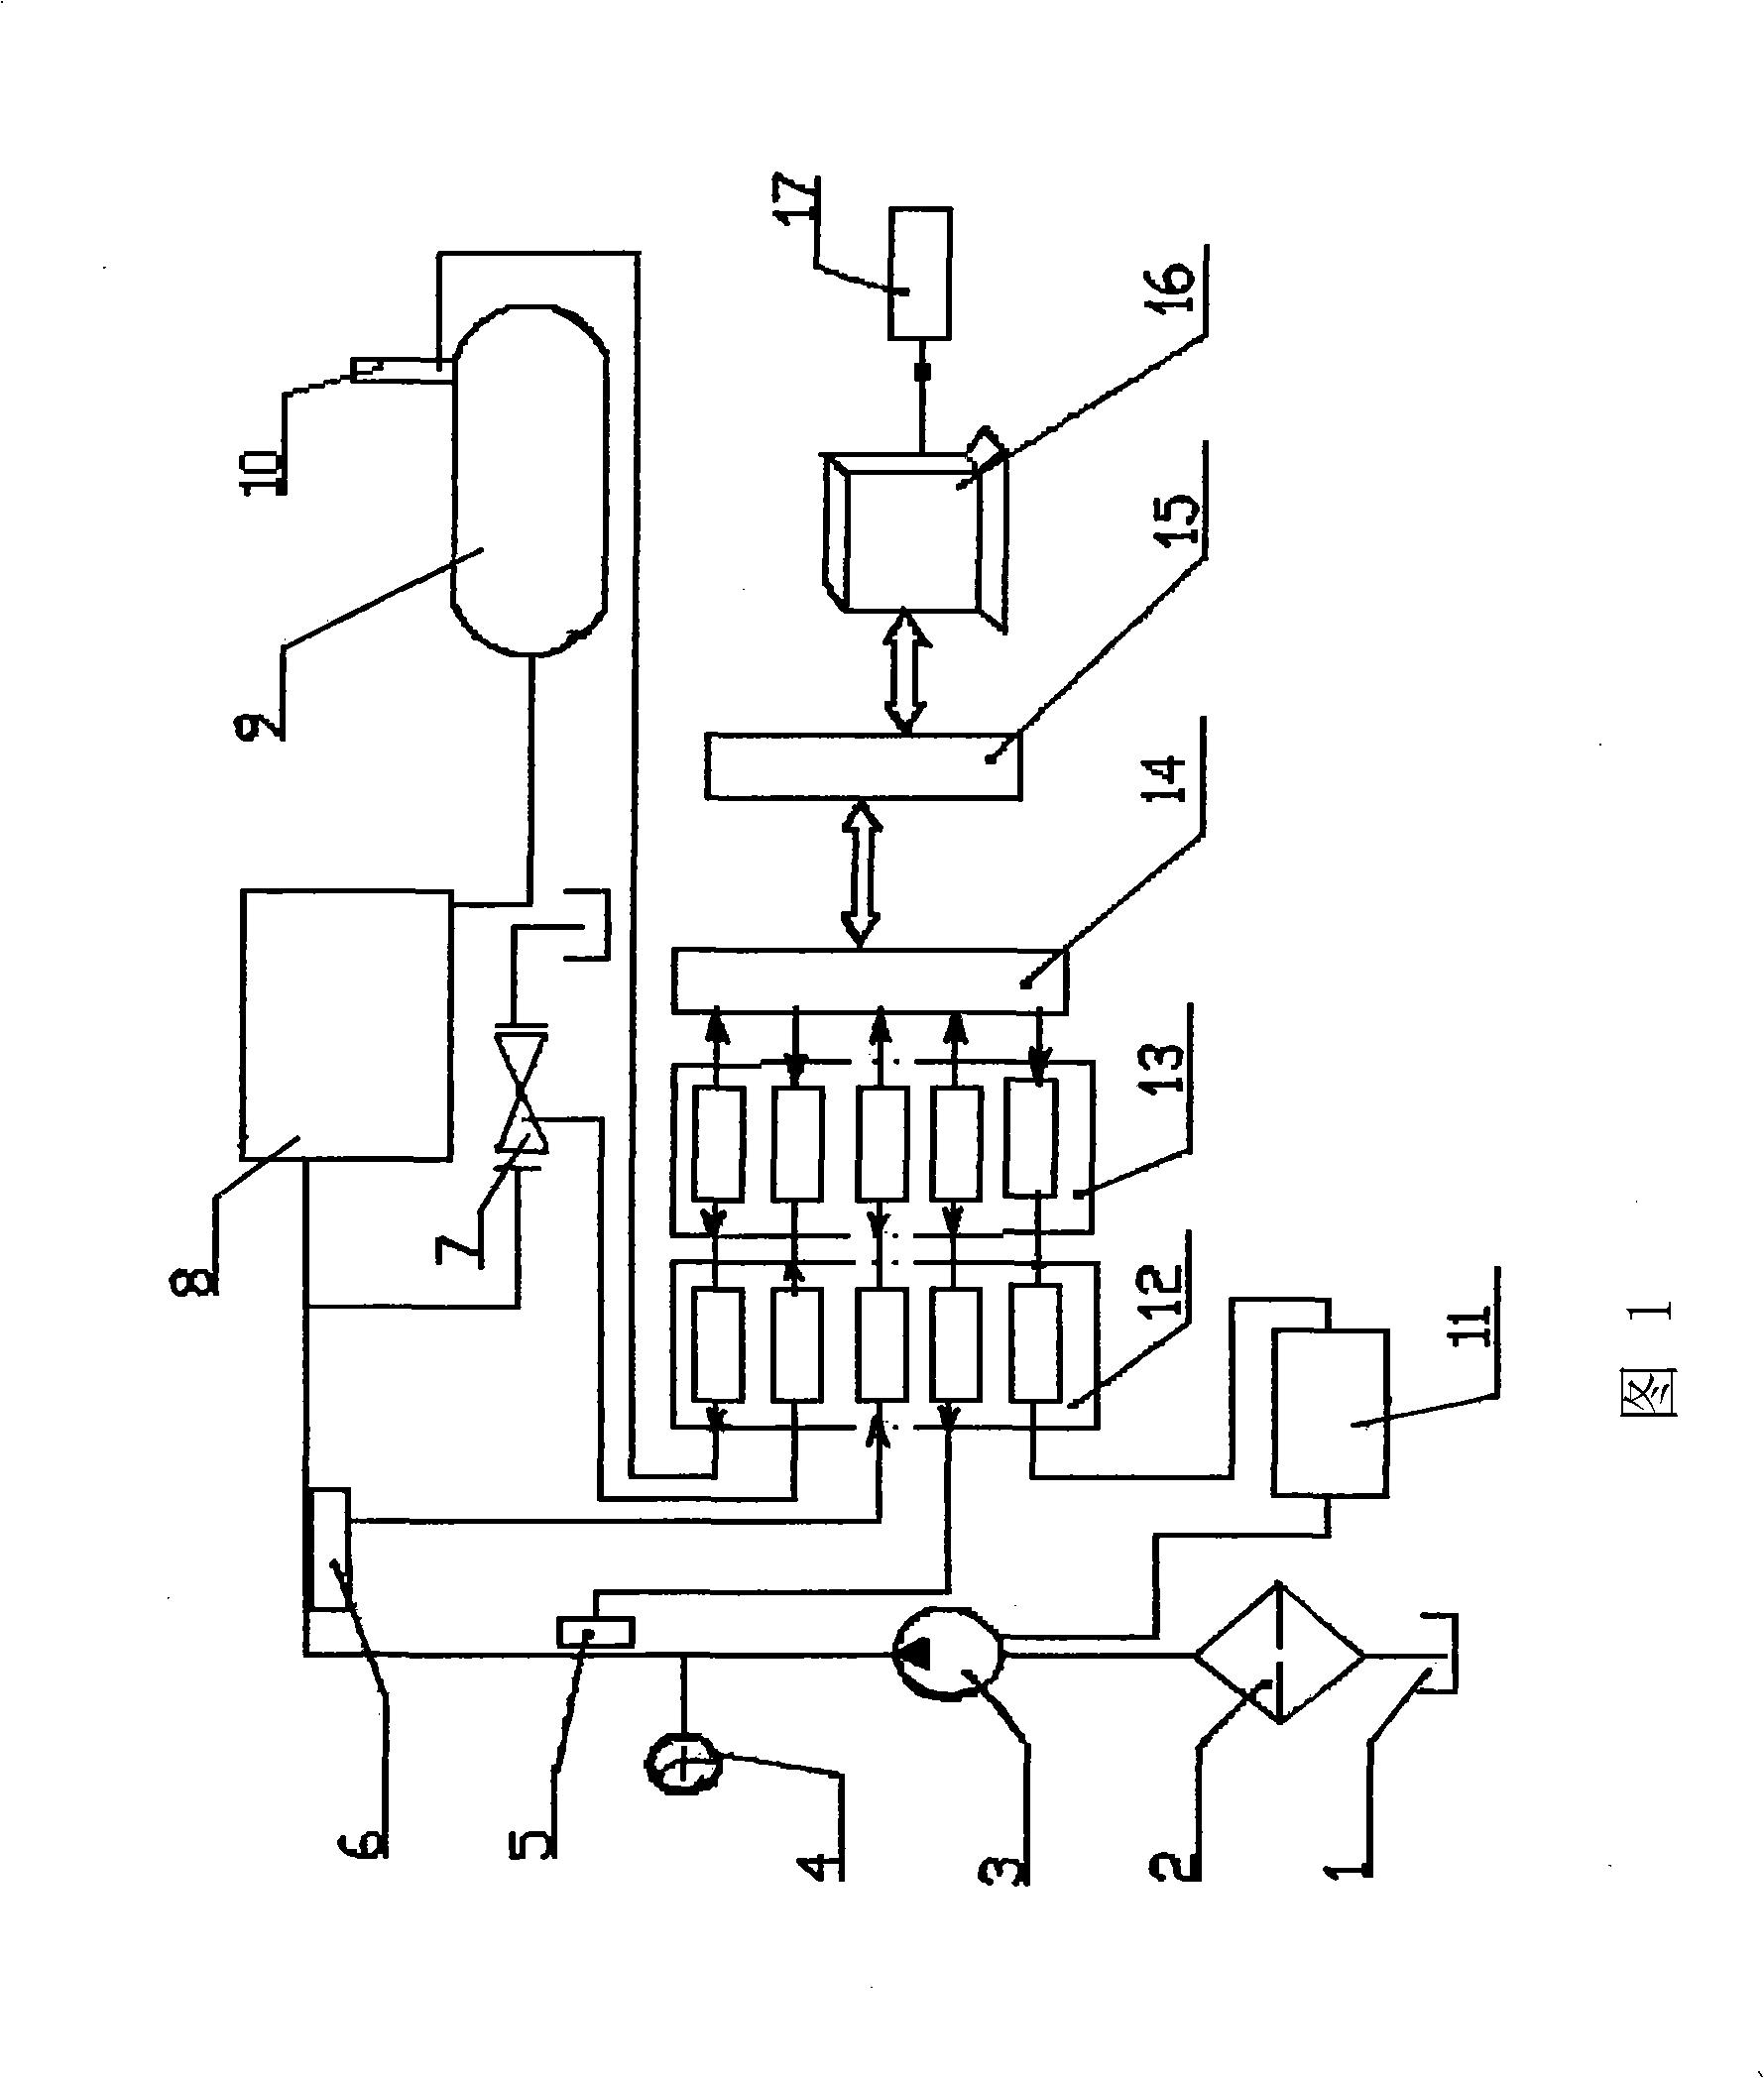 System for automatically measuring container capacity